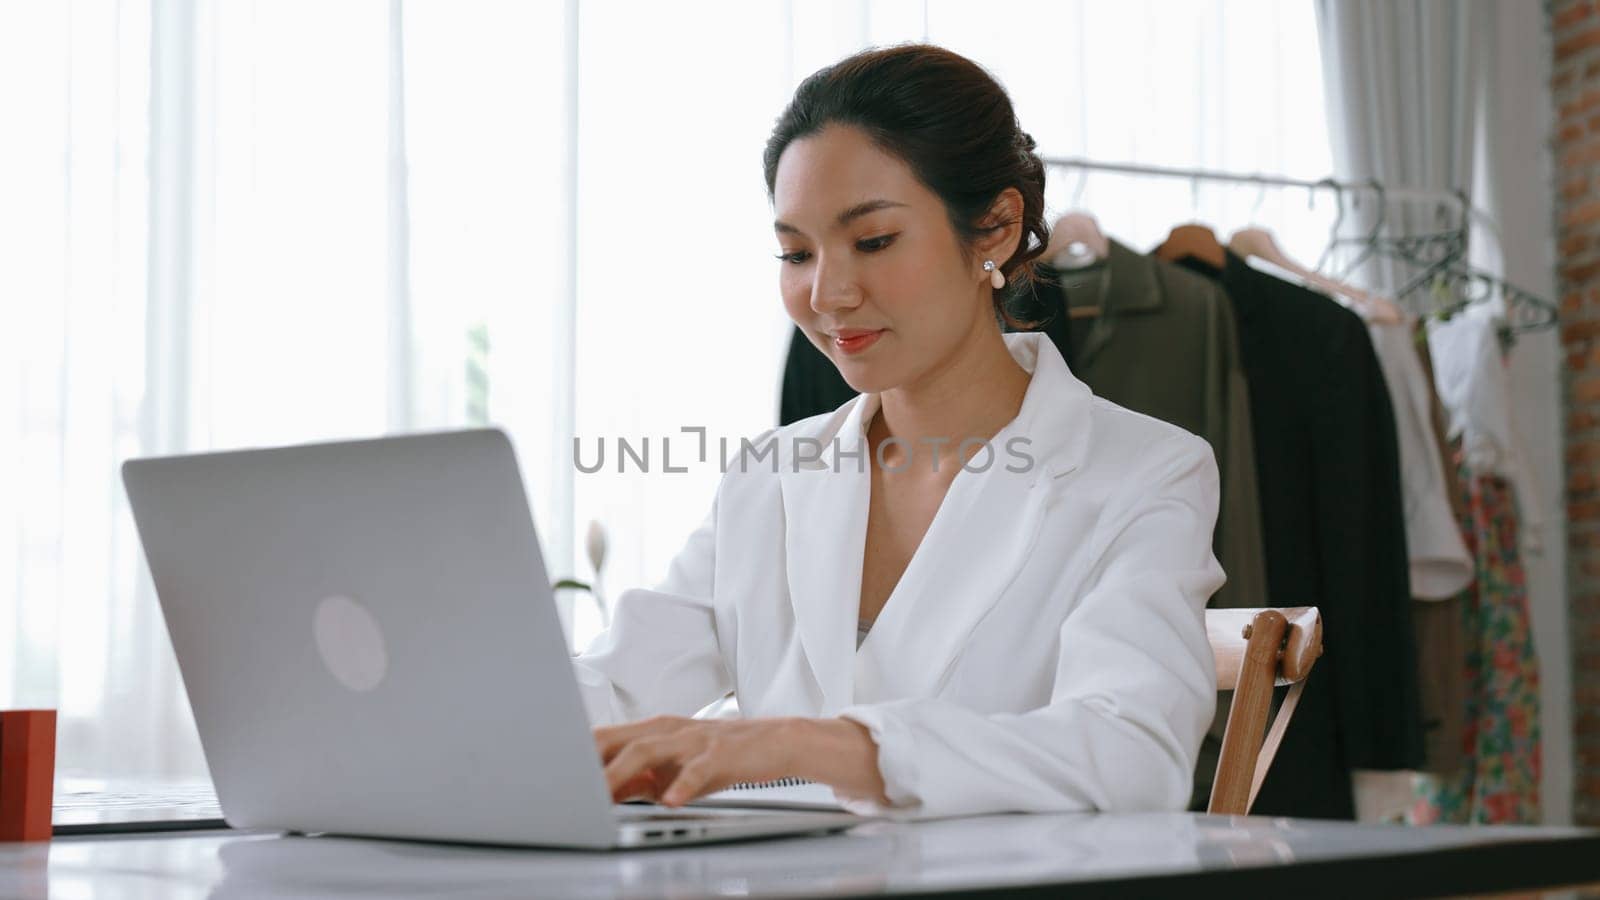 Young businesswoman sitting on the workspace desk using laptop. Vivancy by biancoblue